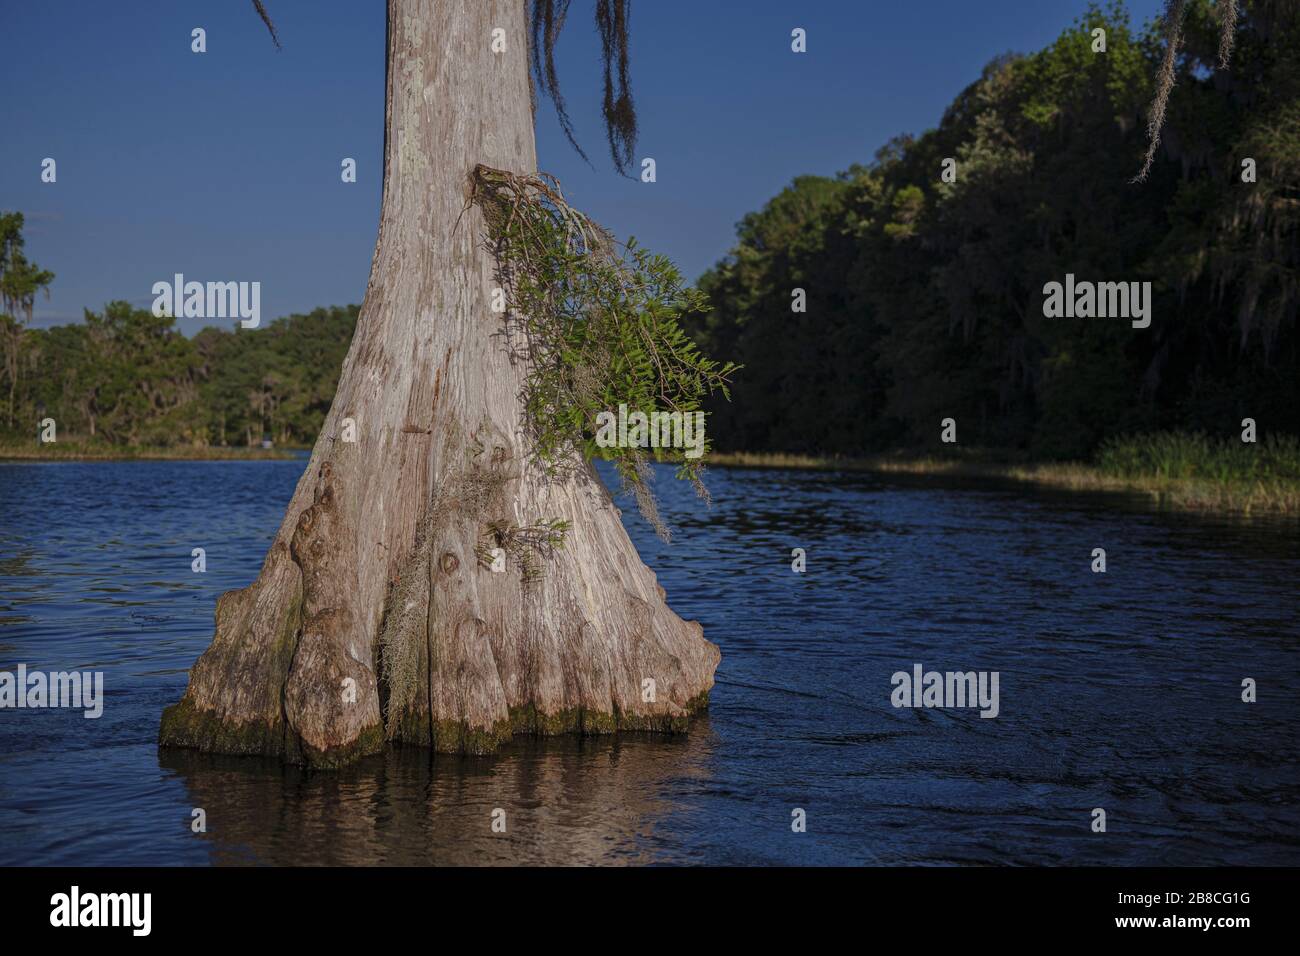 Cypress tree near the middle of the river. Spring fed Rainbow River. Dunnellon, Florida. Stock Photo